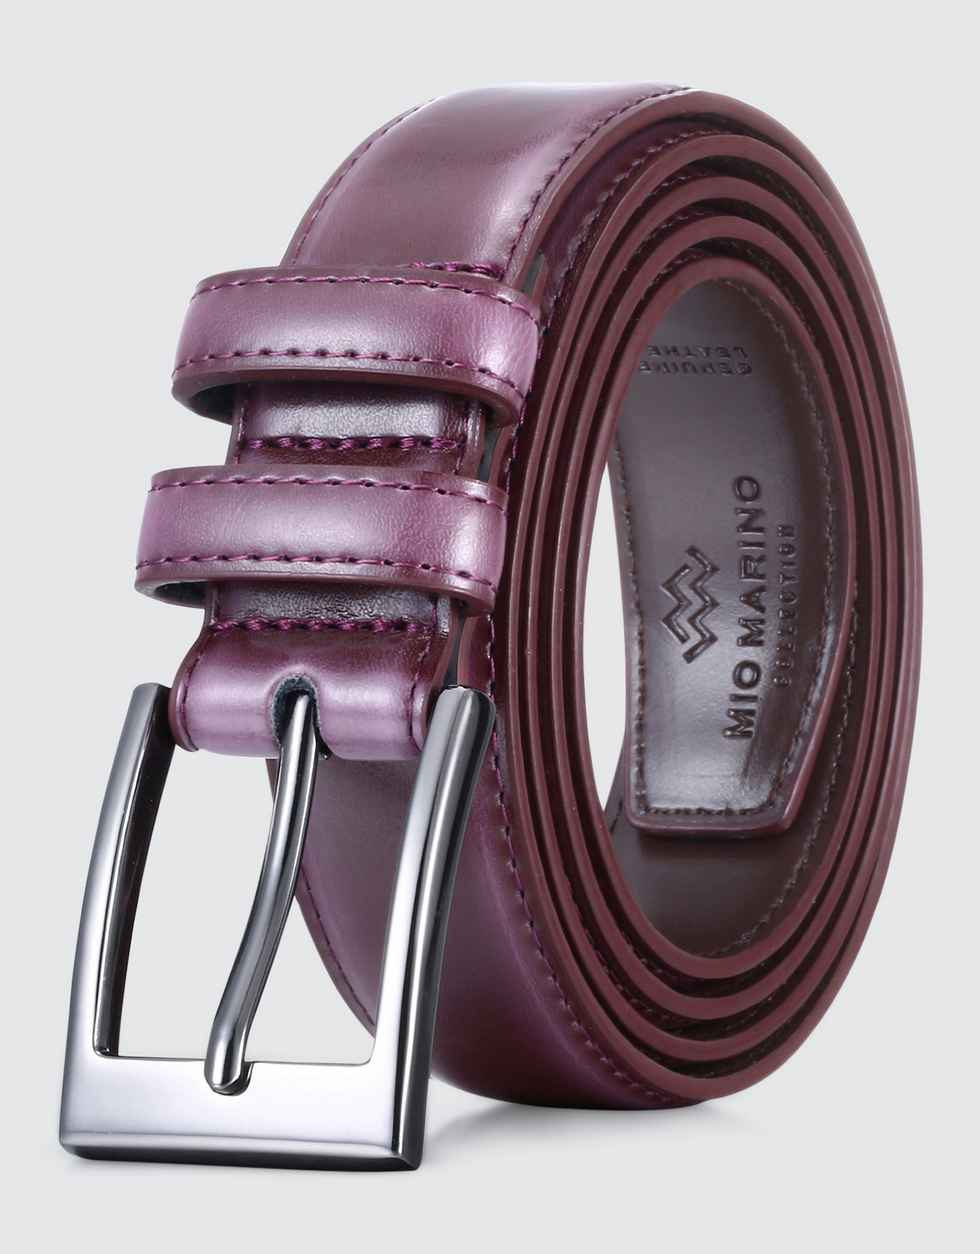 Louis Vuitton Belt. I've been thinking about adding a luxury belt to m